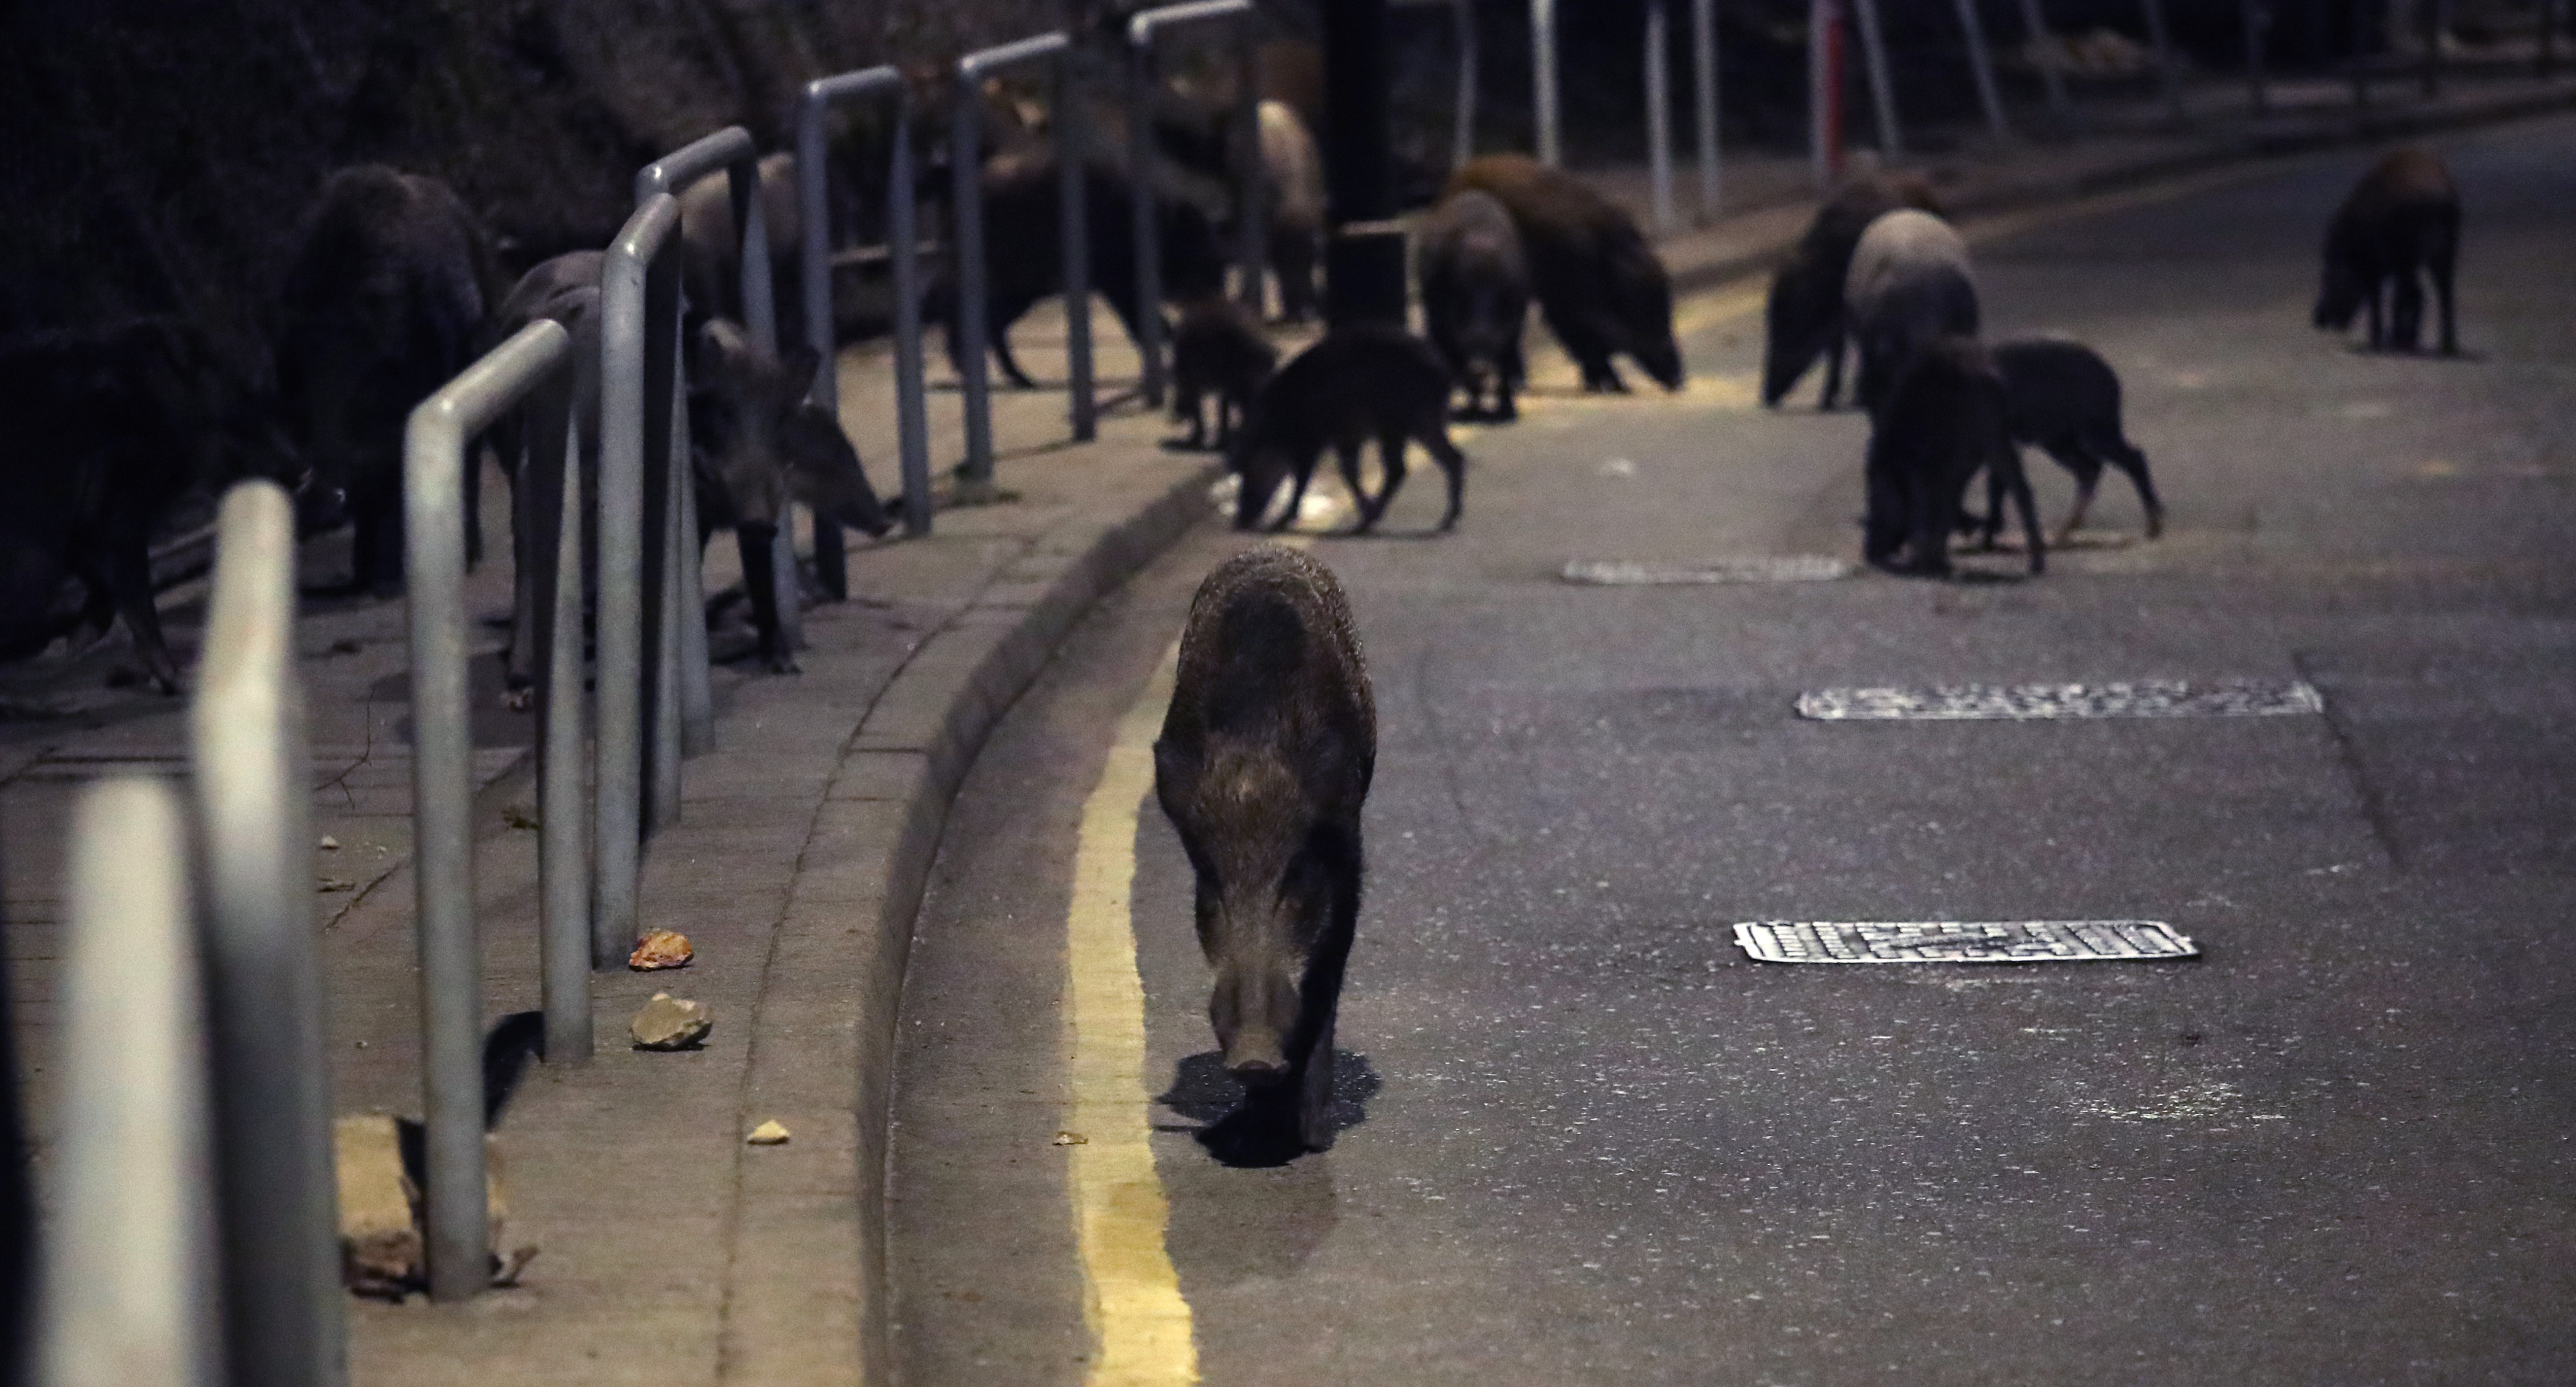 A herd of wild boars are seen on Shum Wan Road in Wong Chuk Hang, during an operation to capture them for culling on November 17. Photo: Edmond So